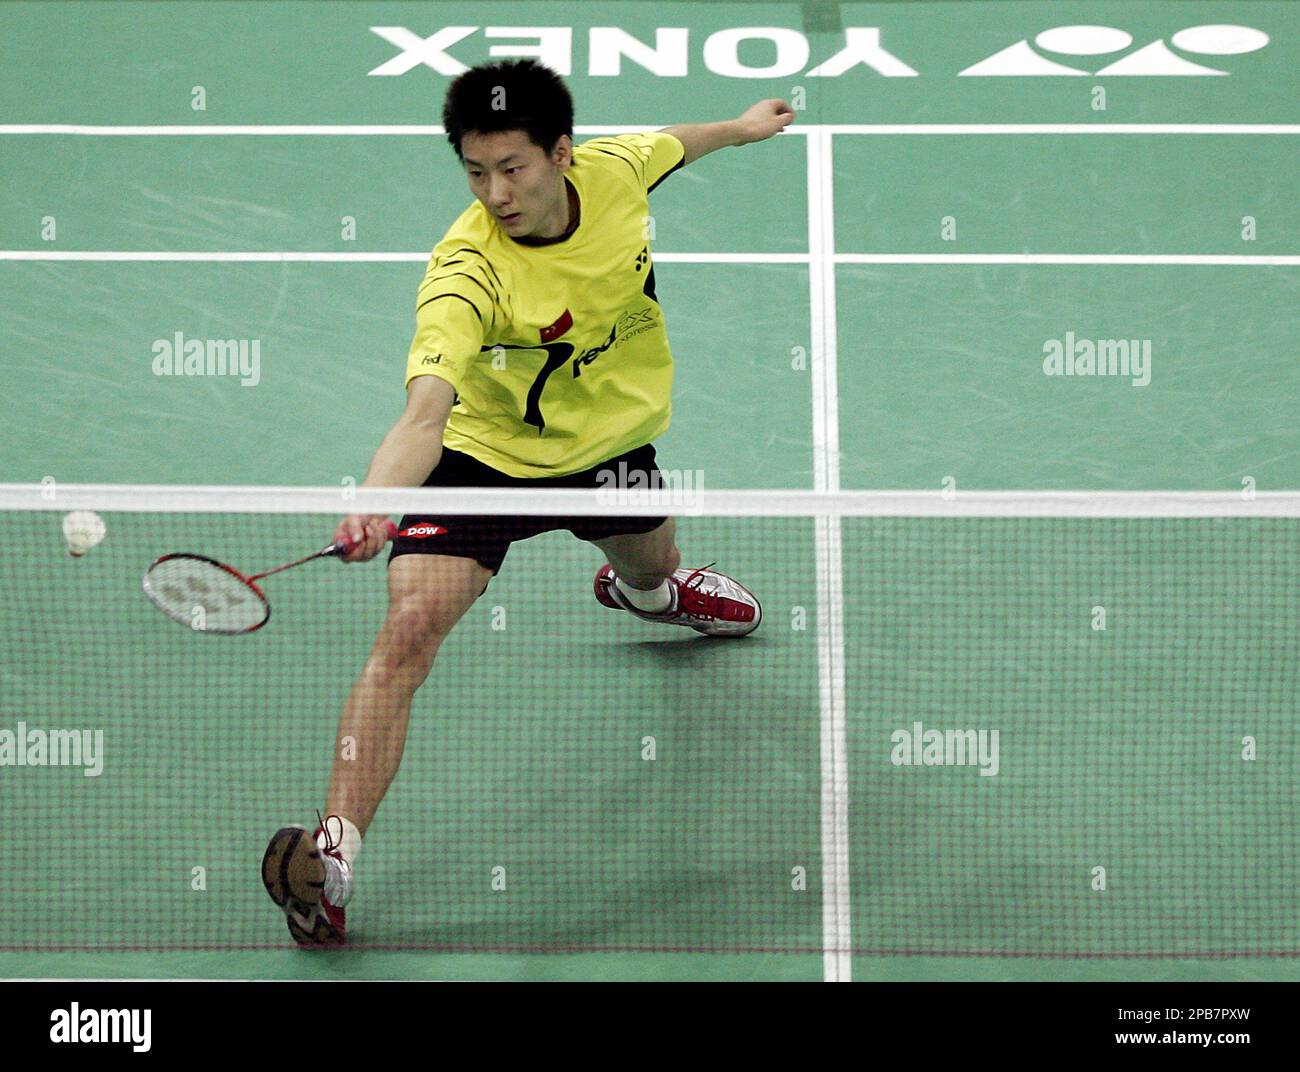 Chinas Chen Jin returns a shot against Ronald Susilo of Singapore during the mens single 3rd round of 2007 World Badminton Championships at Putra Stadium in Kuala Lumpur, Malaysia, Thursday, Aug